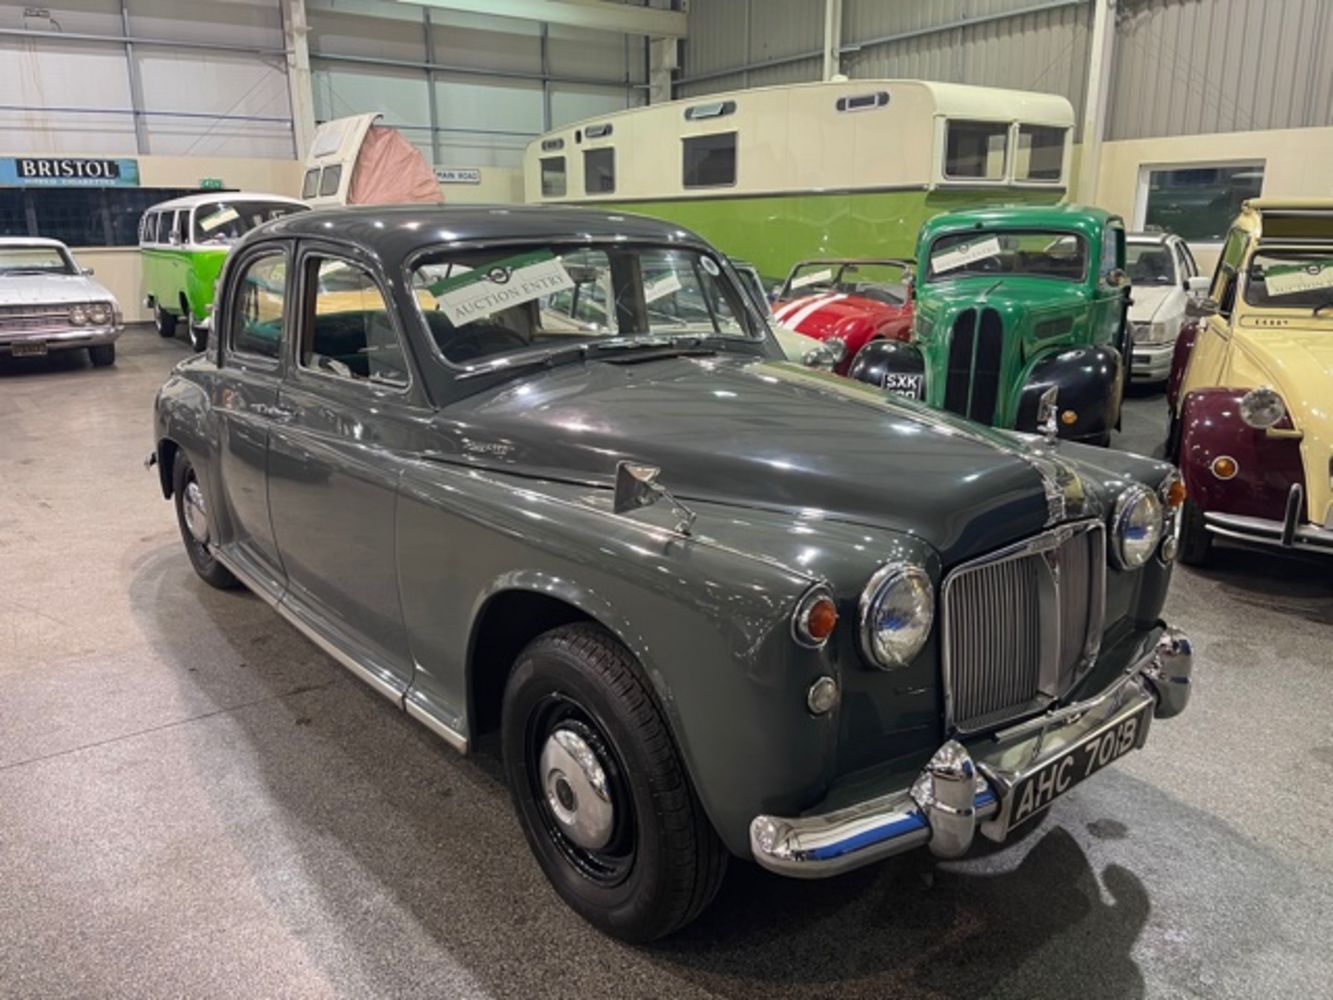 12th DECEMBER 2020 CLASSIC VEHICLES AUCTION -  LOTS 101 ONWARDS